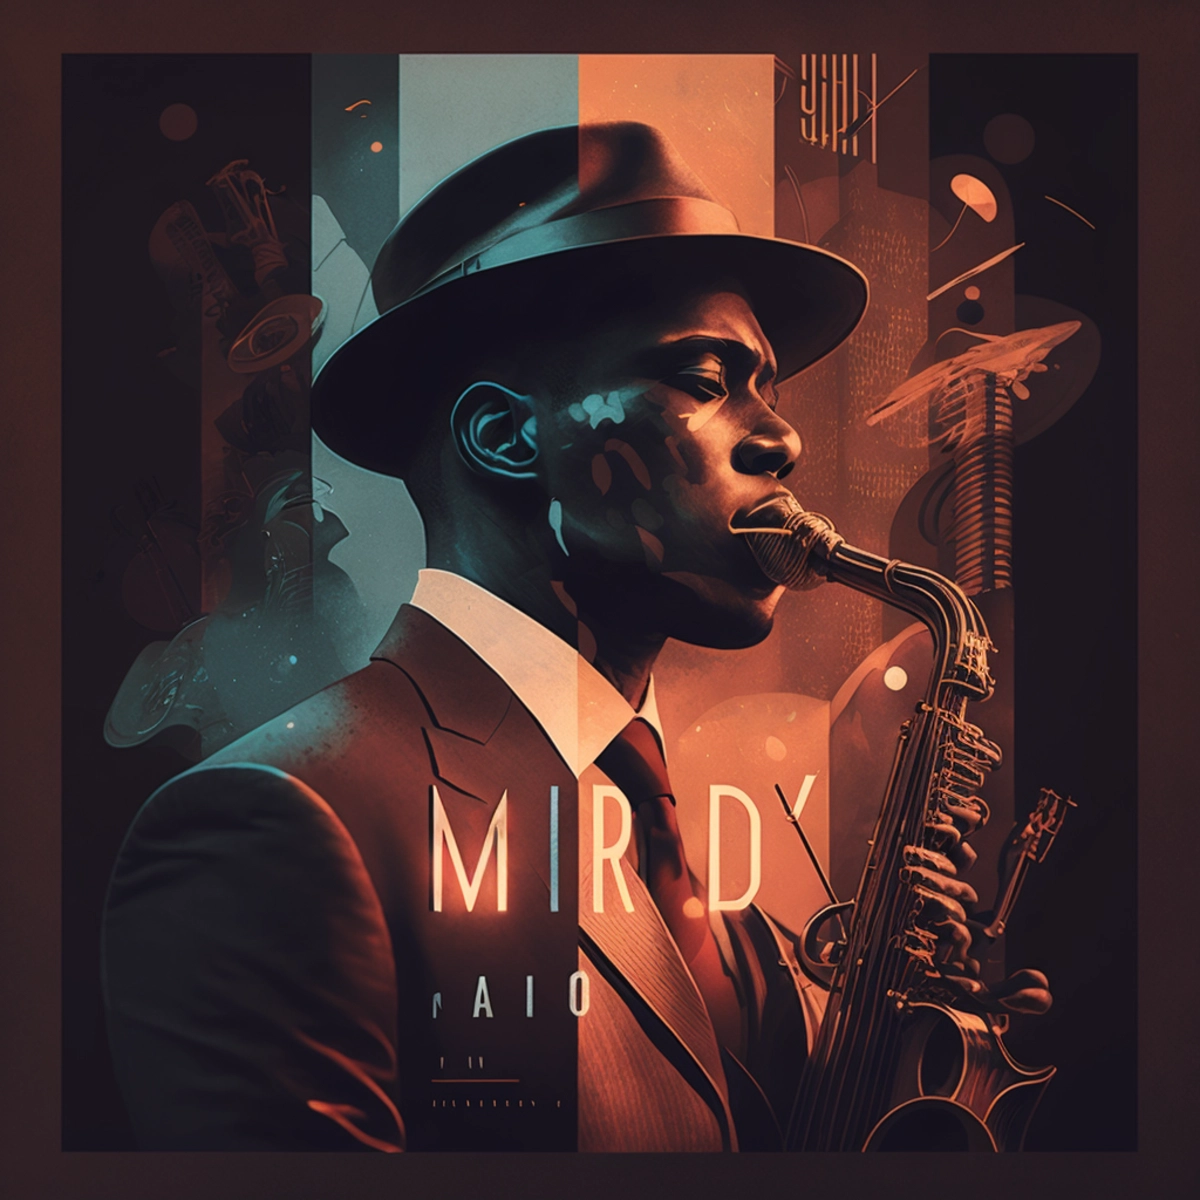 A vintage-inspired album cover with jazz musician